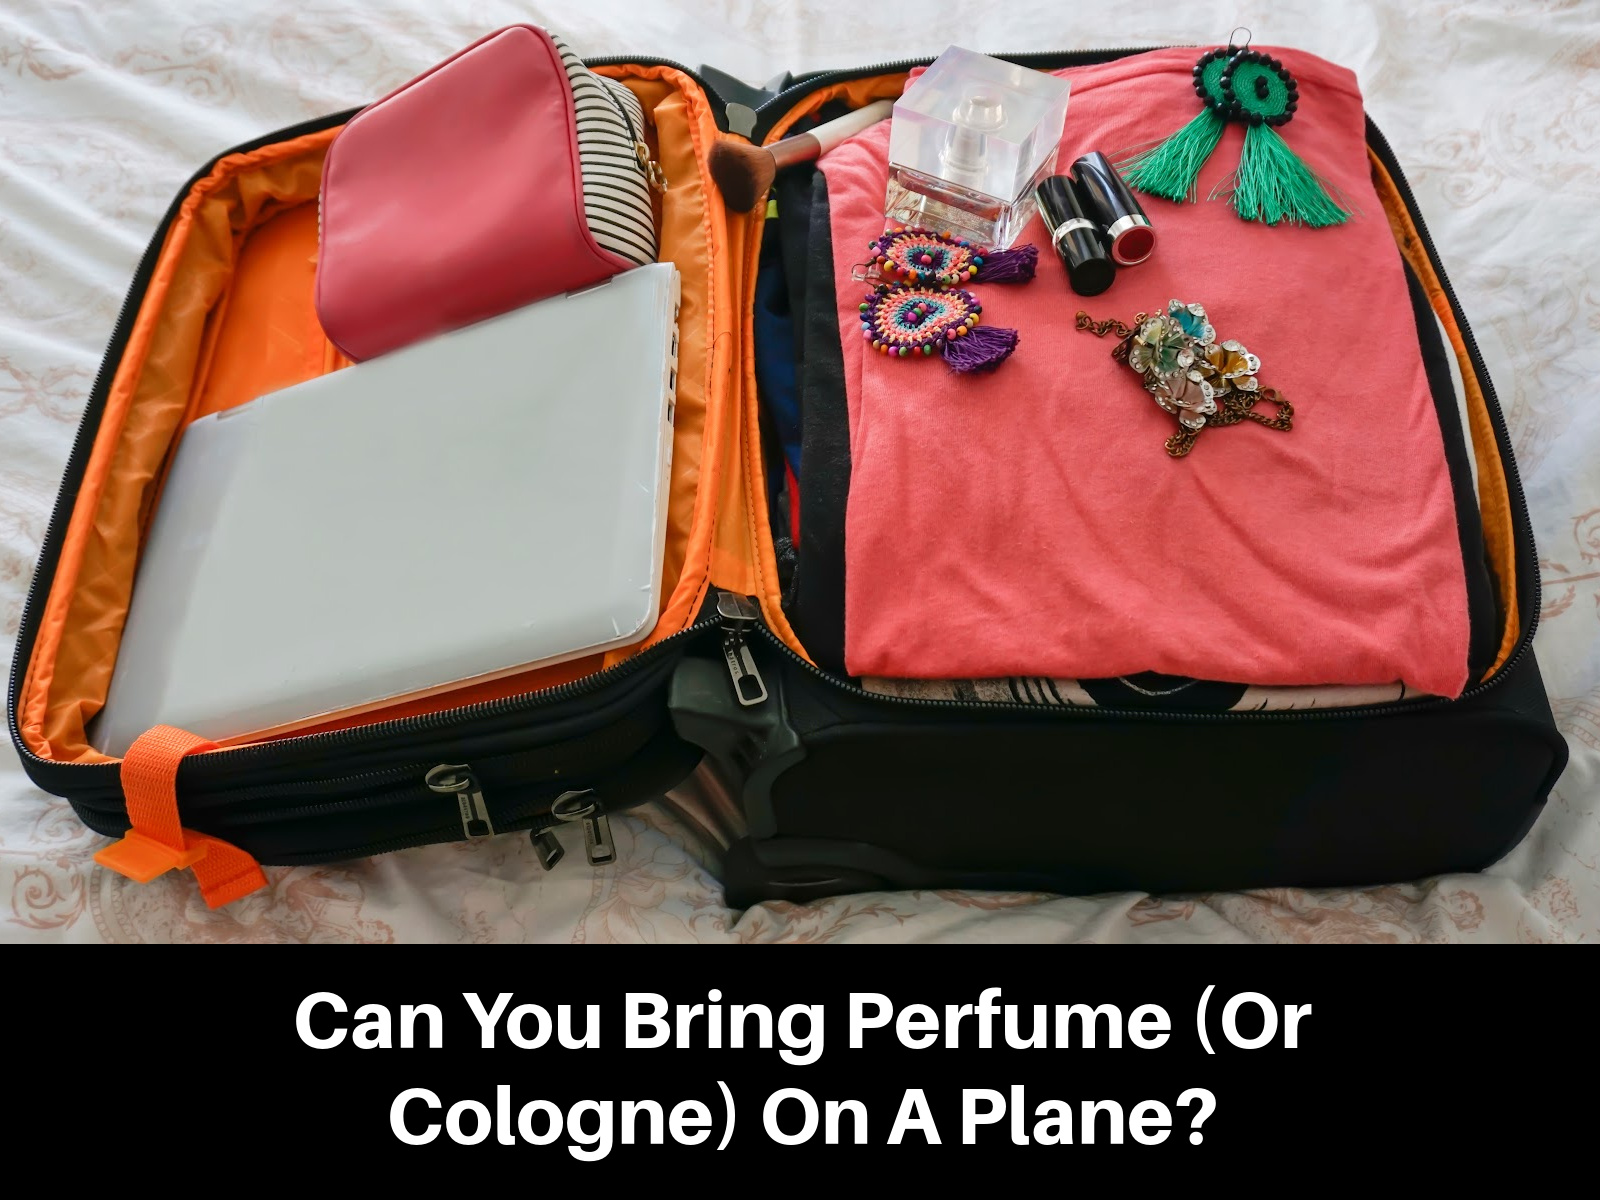 Can You Bring Perfume (Or Cologne) On A Plane?